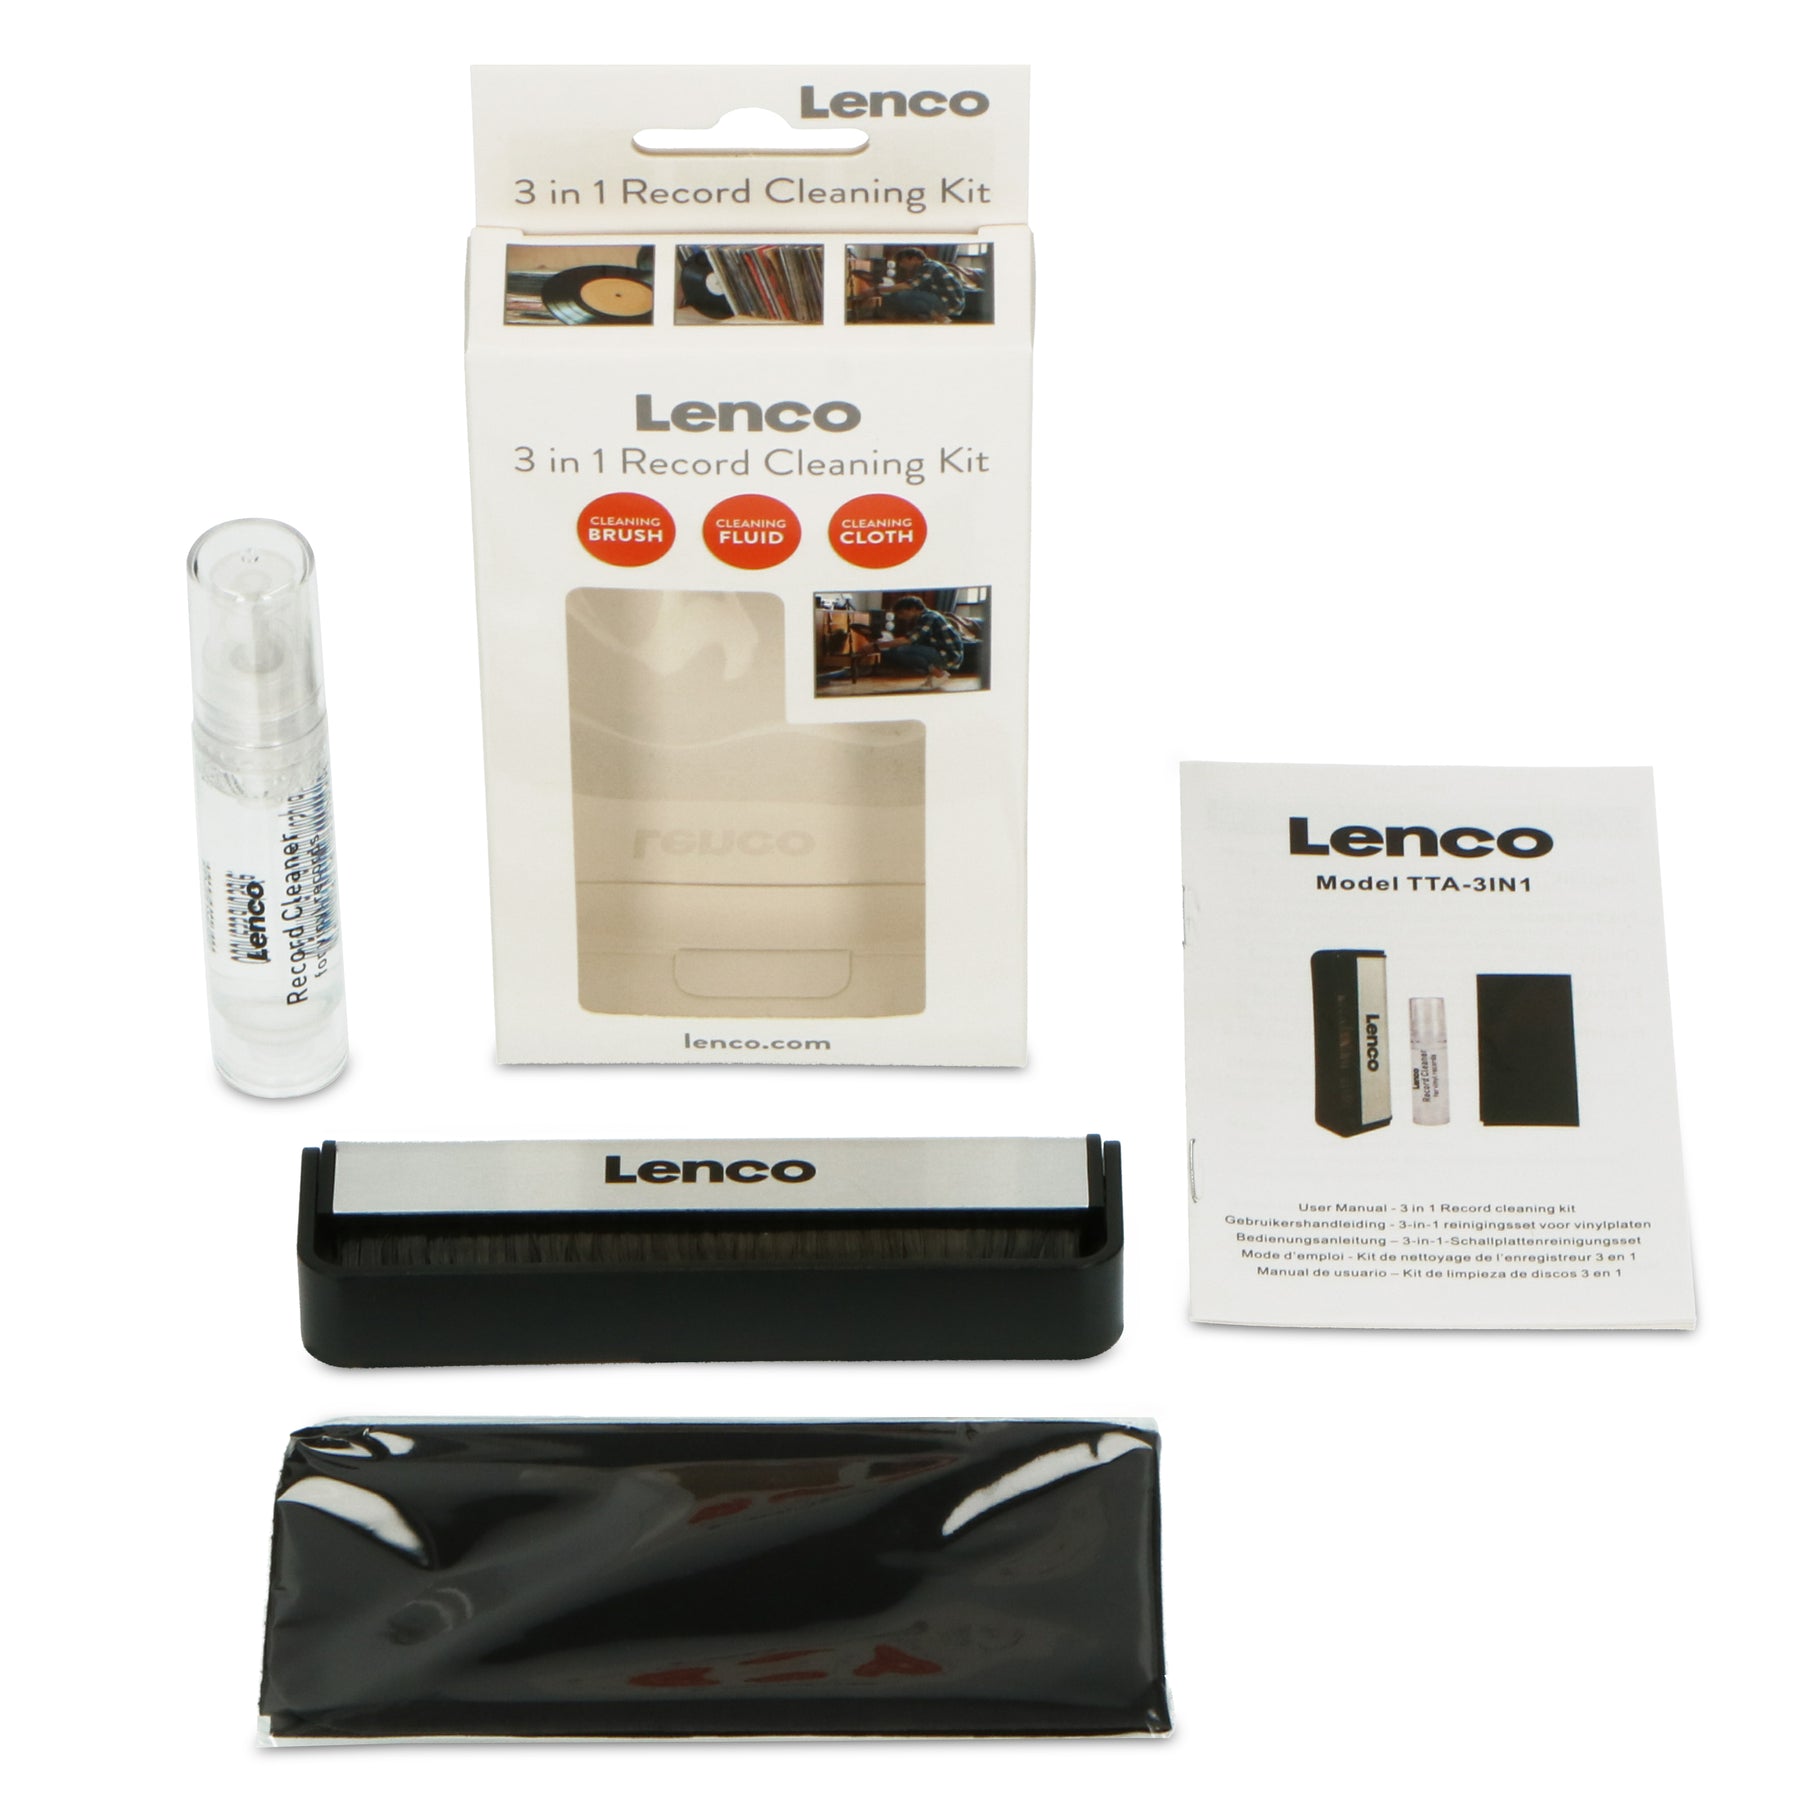 Lenco 5-in-1 Record Cleaning Kit at